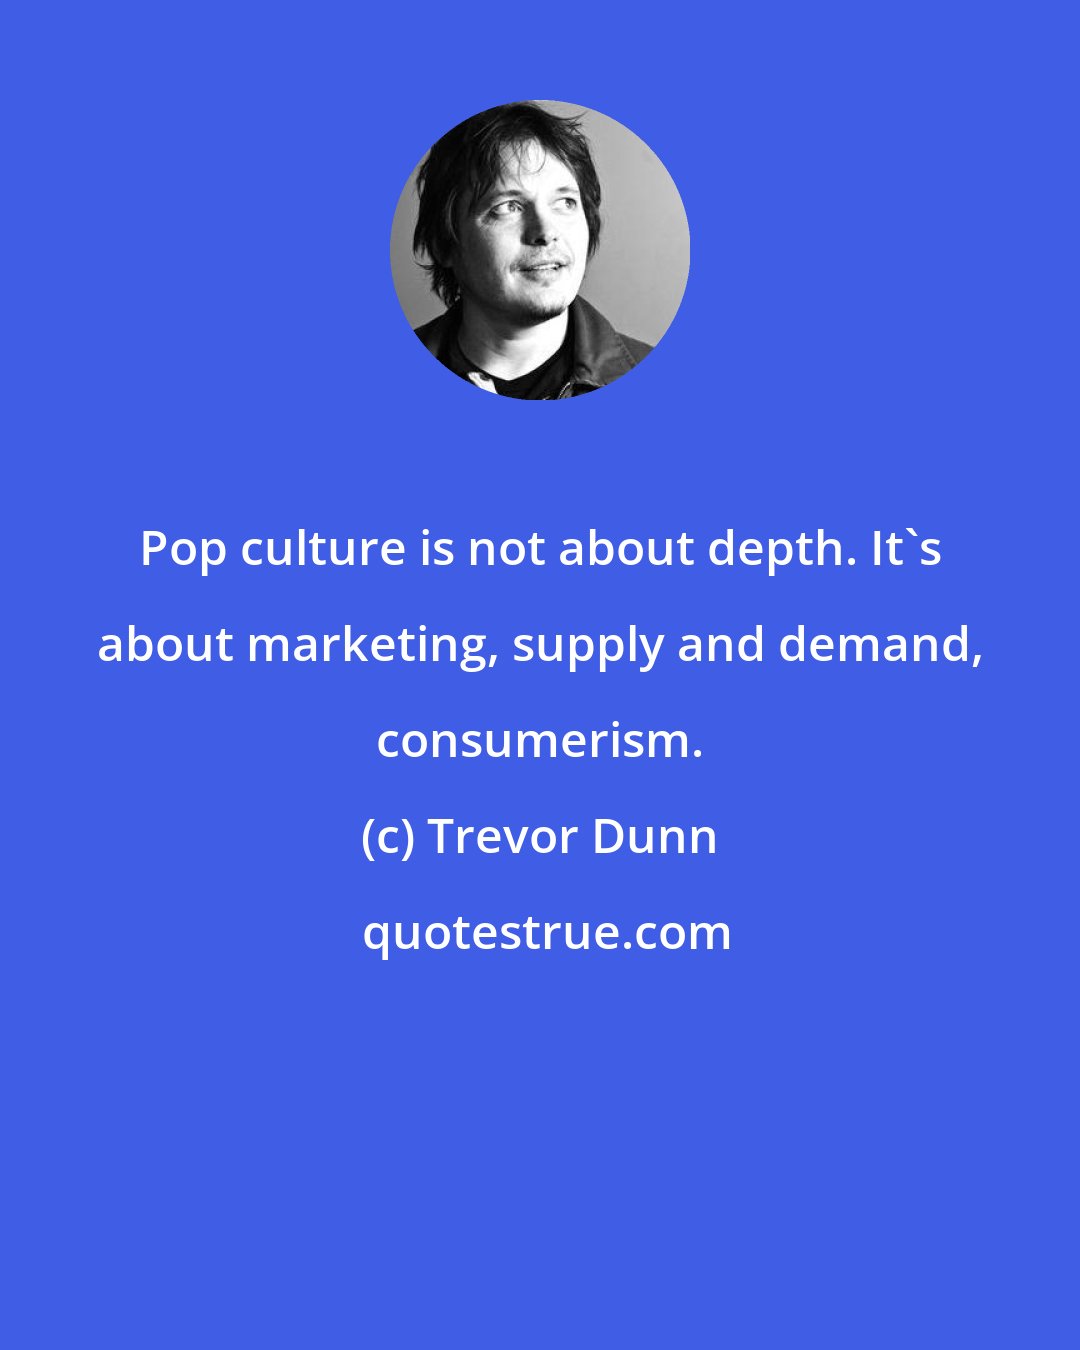 Trevor Dunn: Pop culture is not about depth. It's about marketing, supply and demand, consumerism.